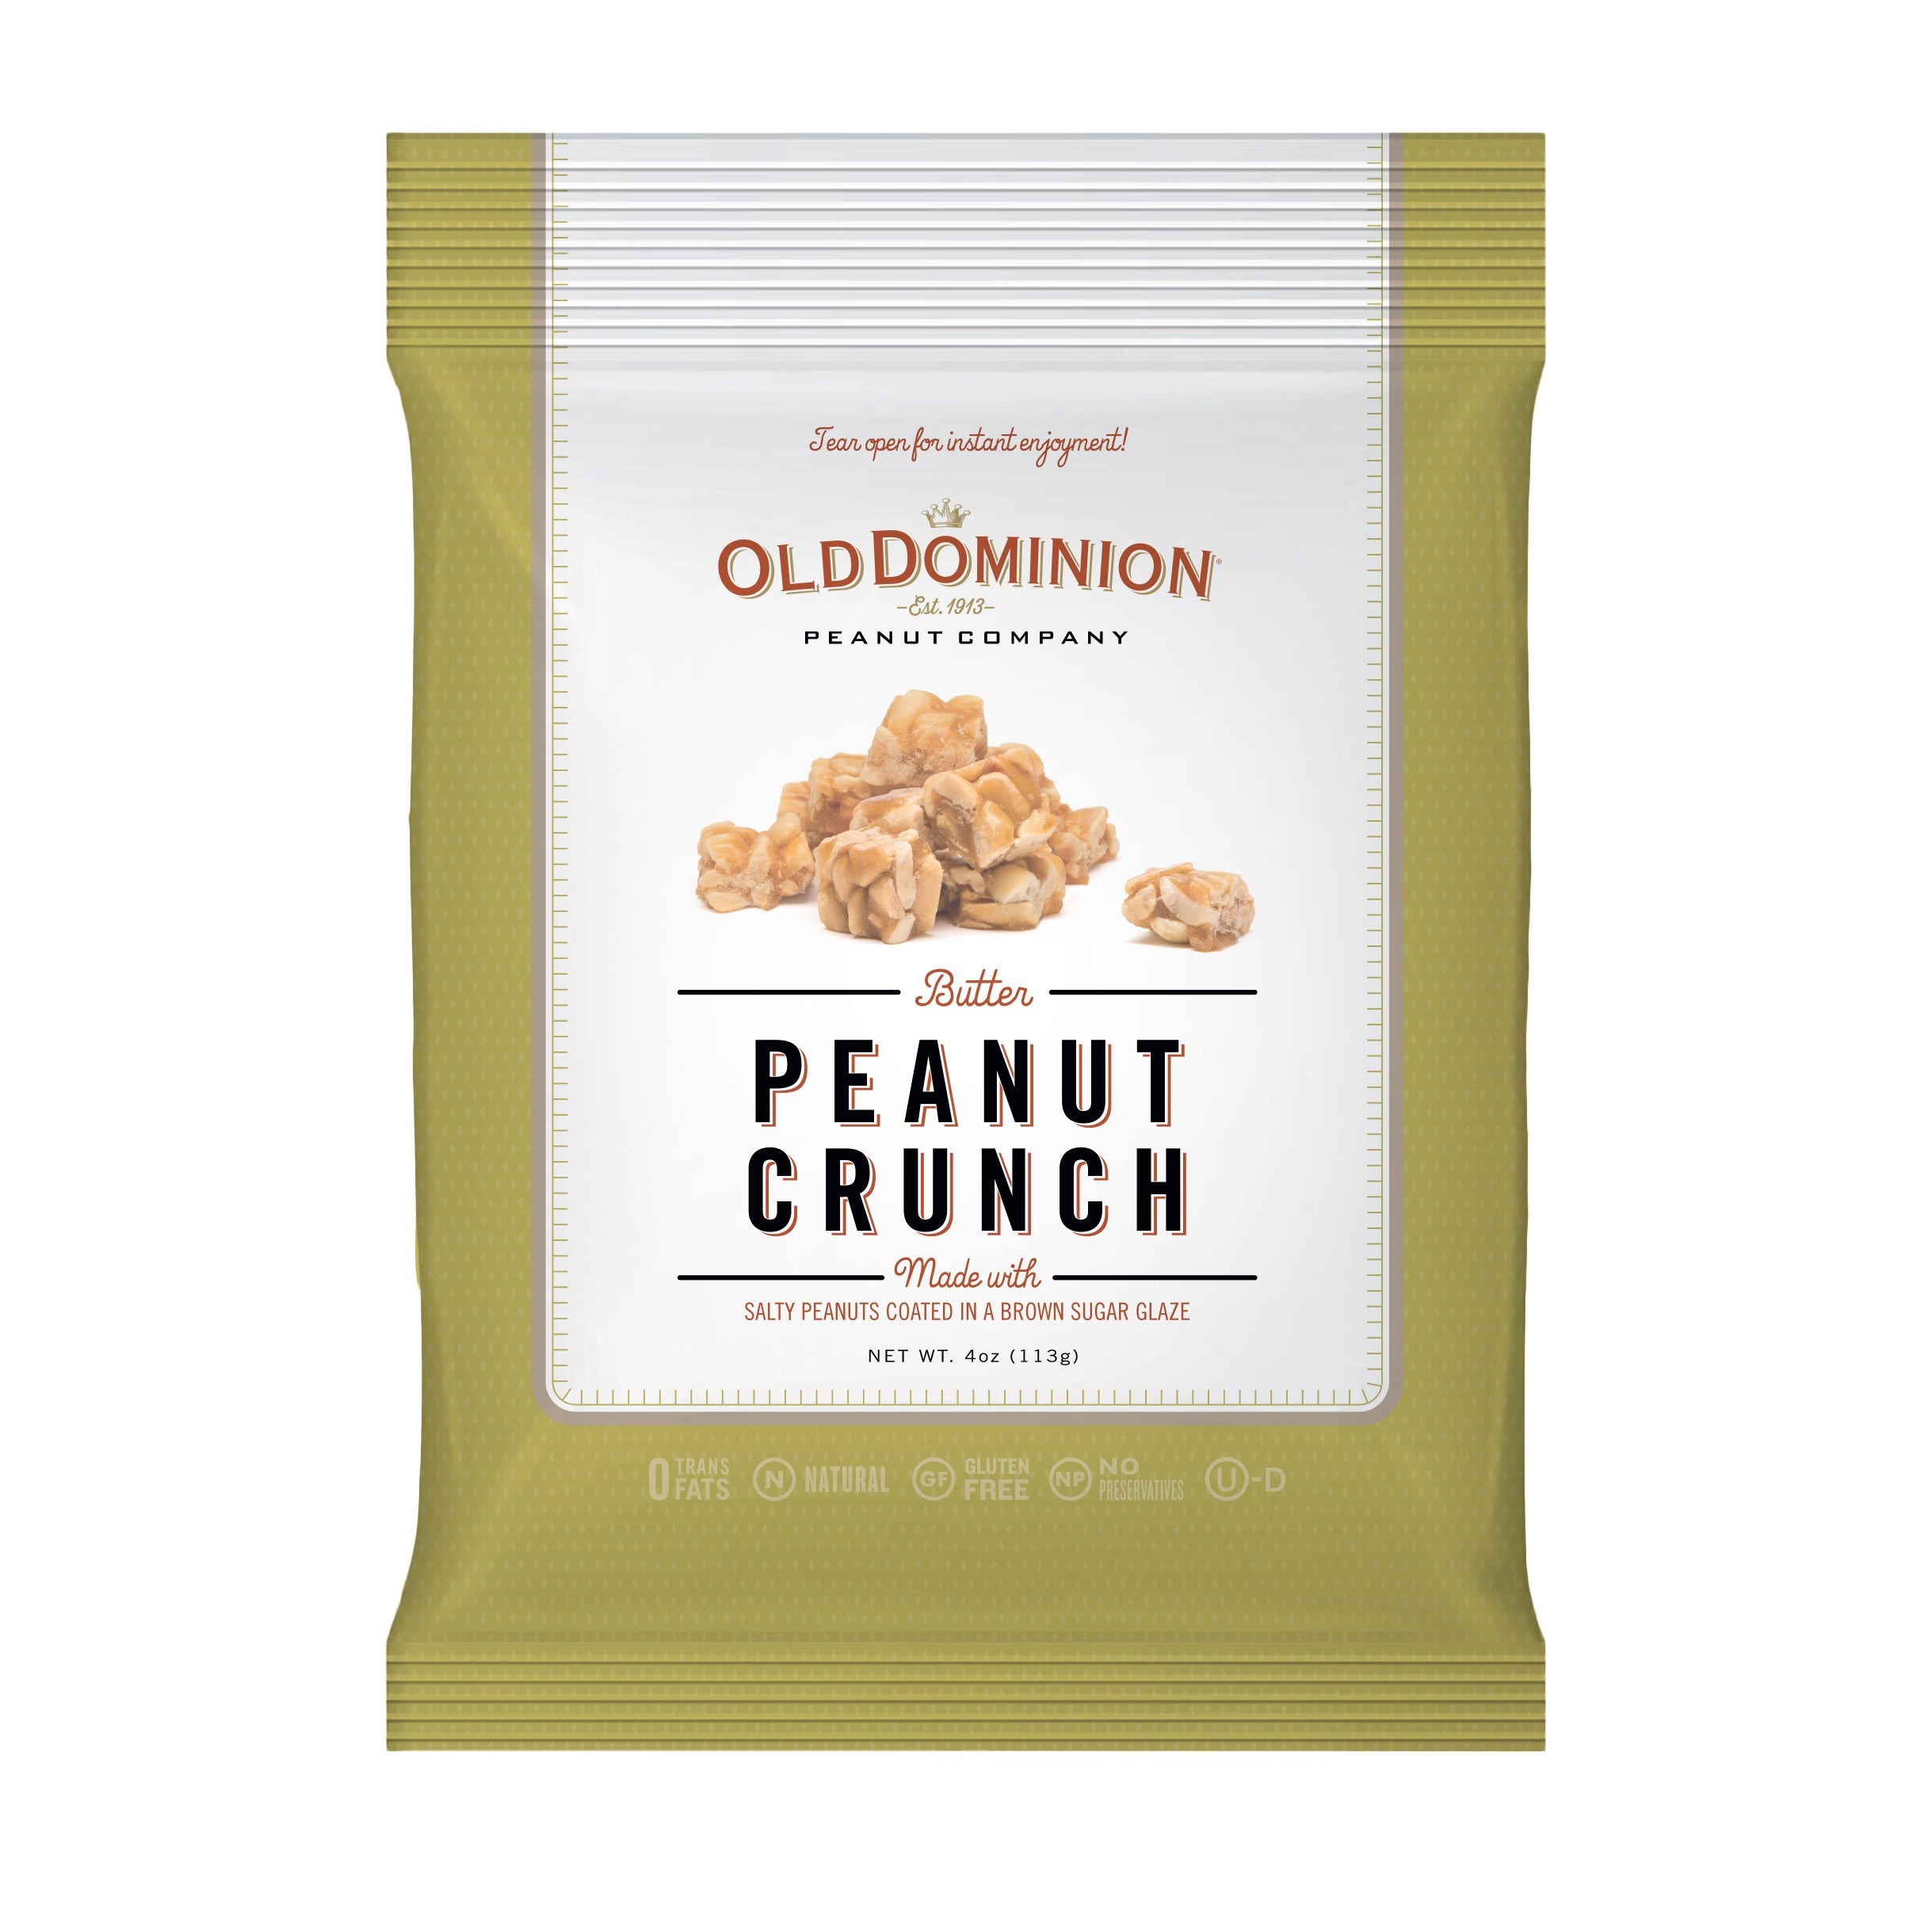 Old Dominion Peanut Crunch Grab and Go Bag